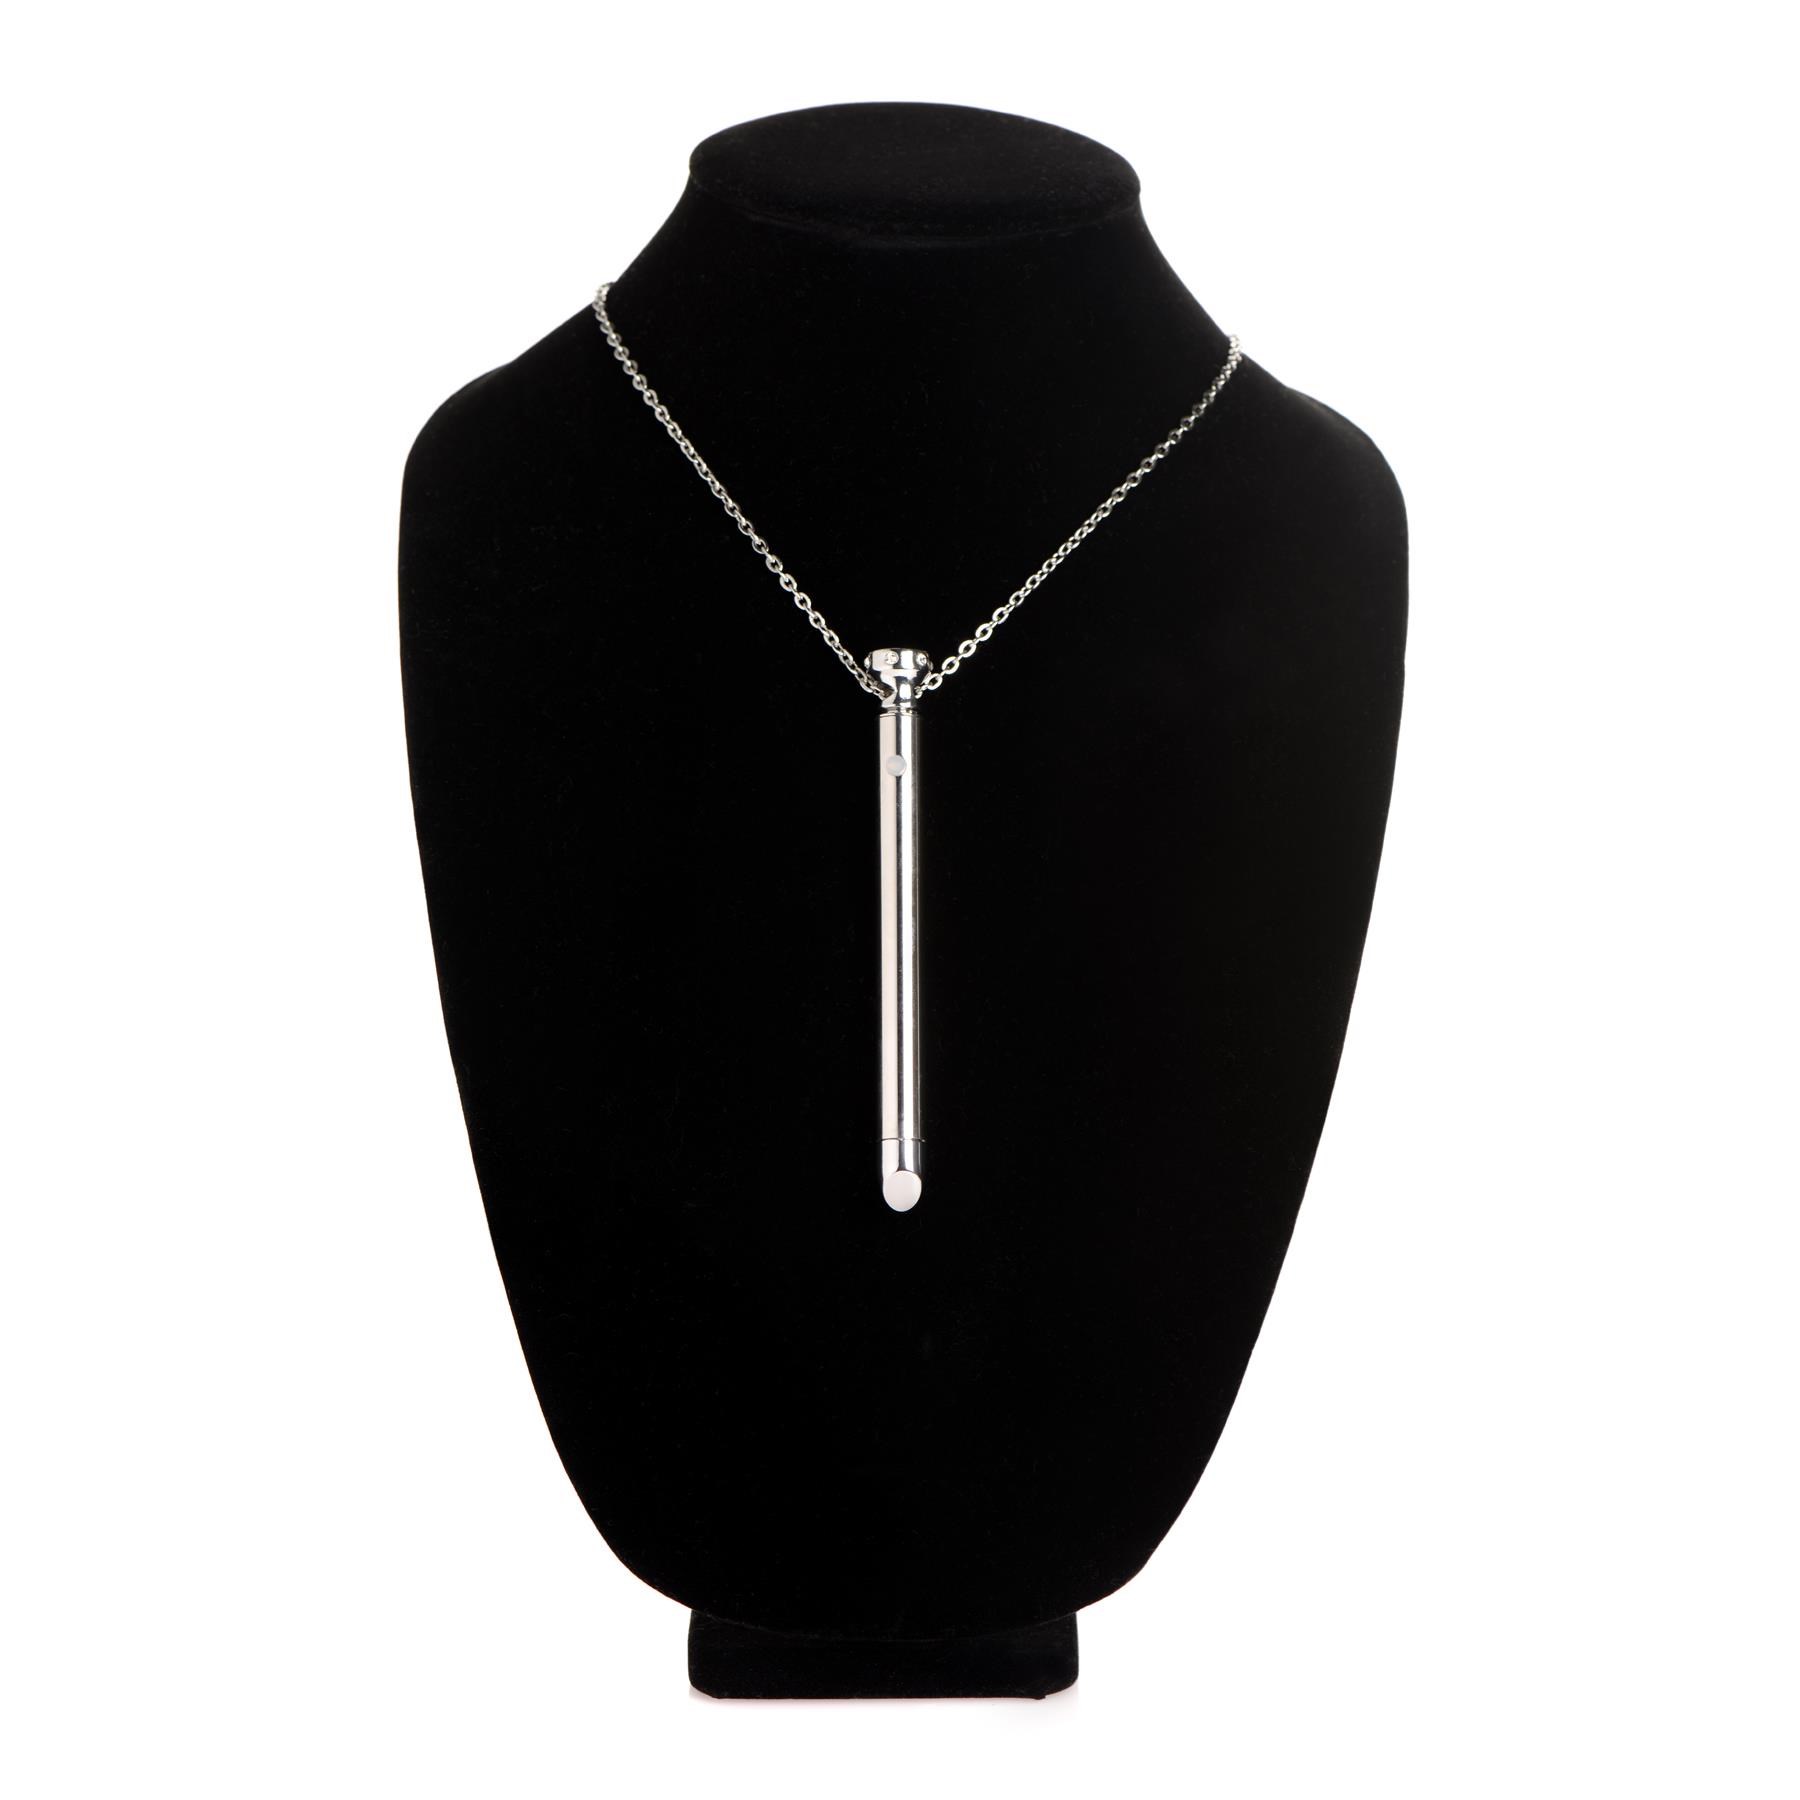 Charmed Vibrating Necklace - Product Shot - Silver - On Mannequin